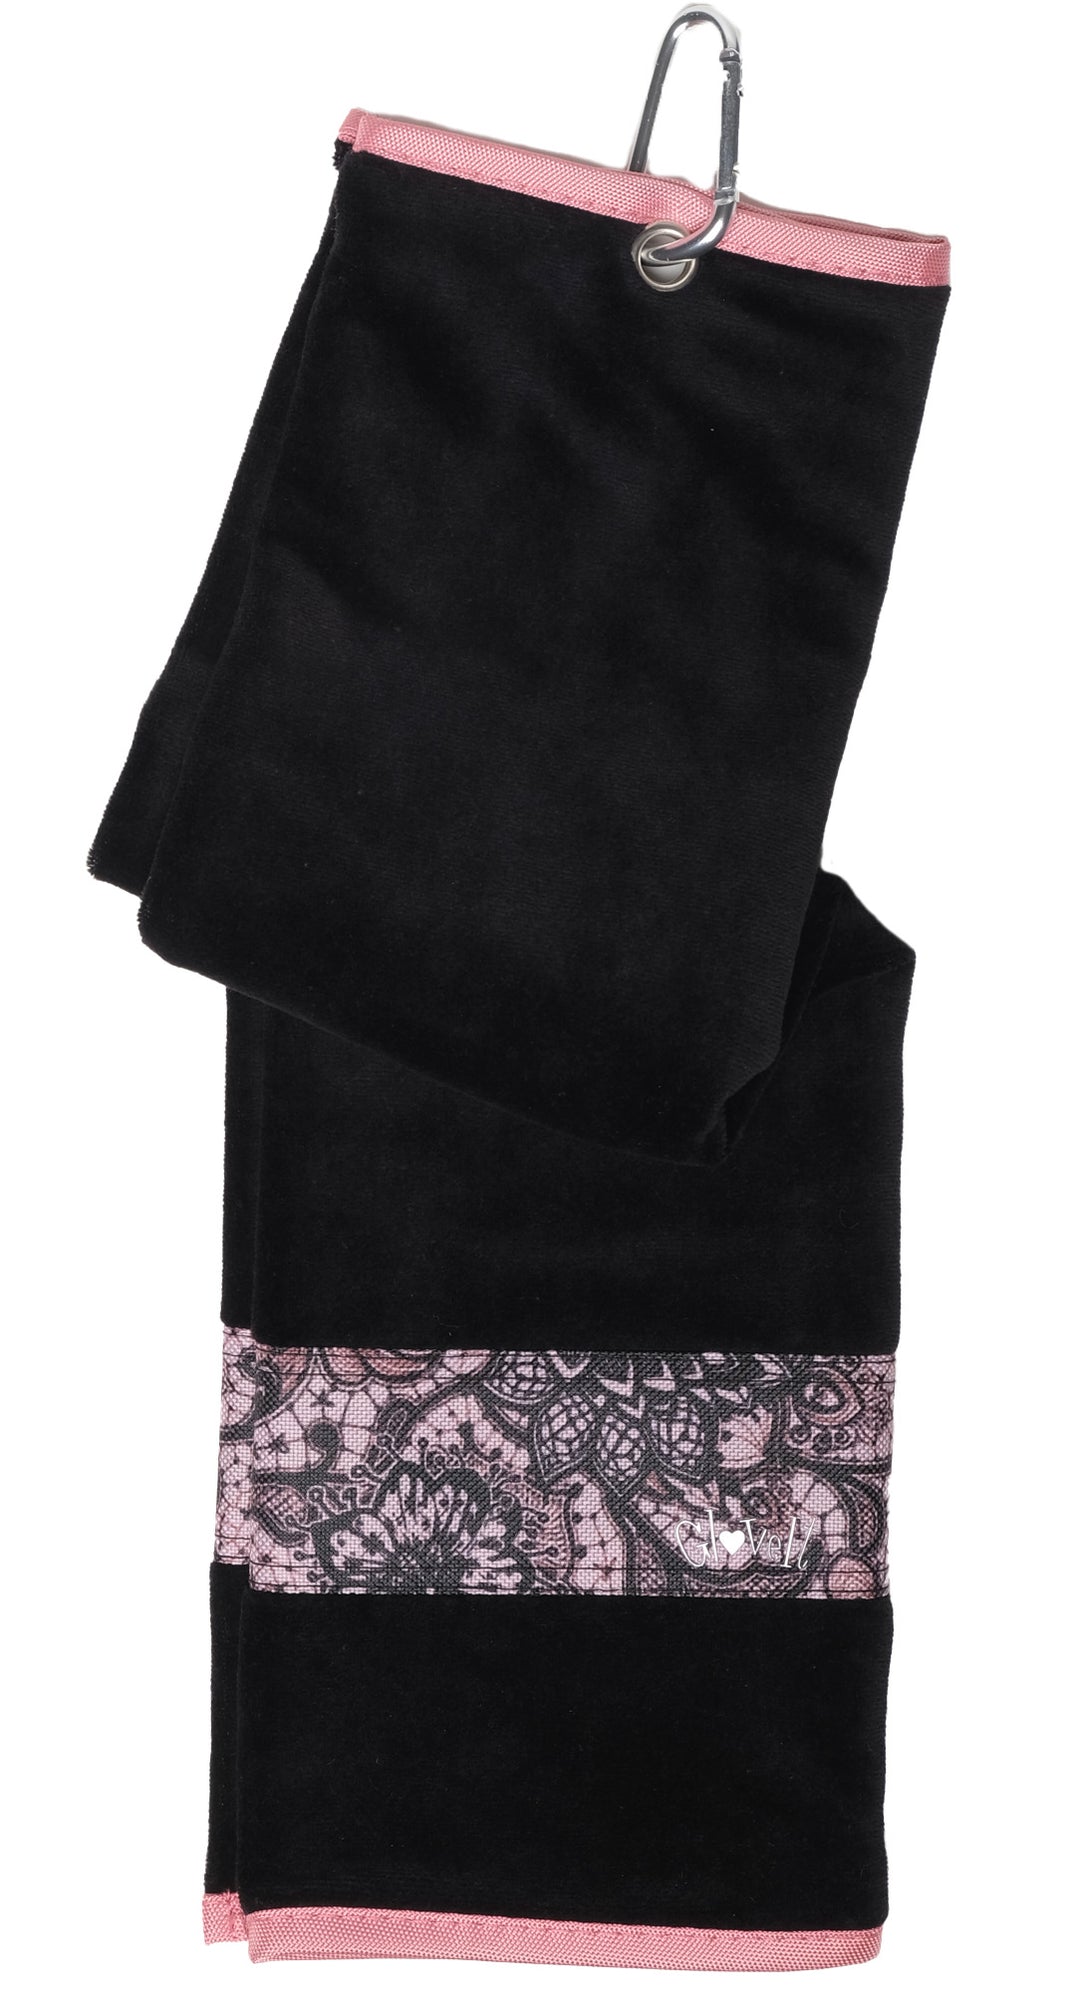 GLOVE IT WOMENS TOWEL - ROSE LACE